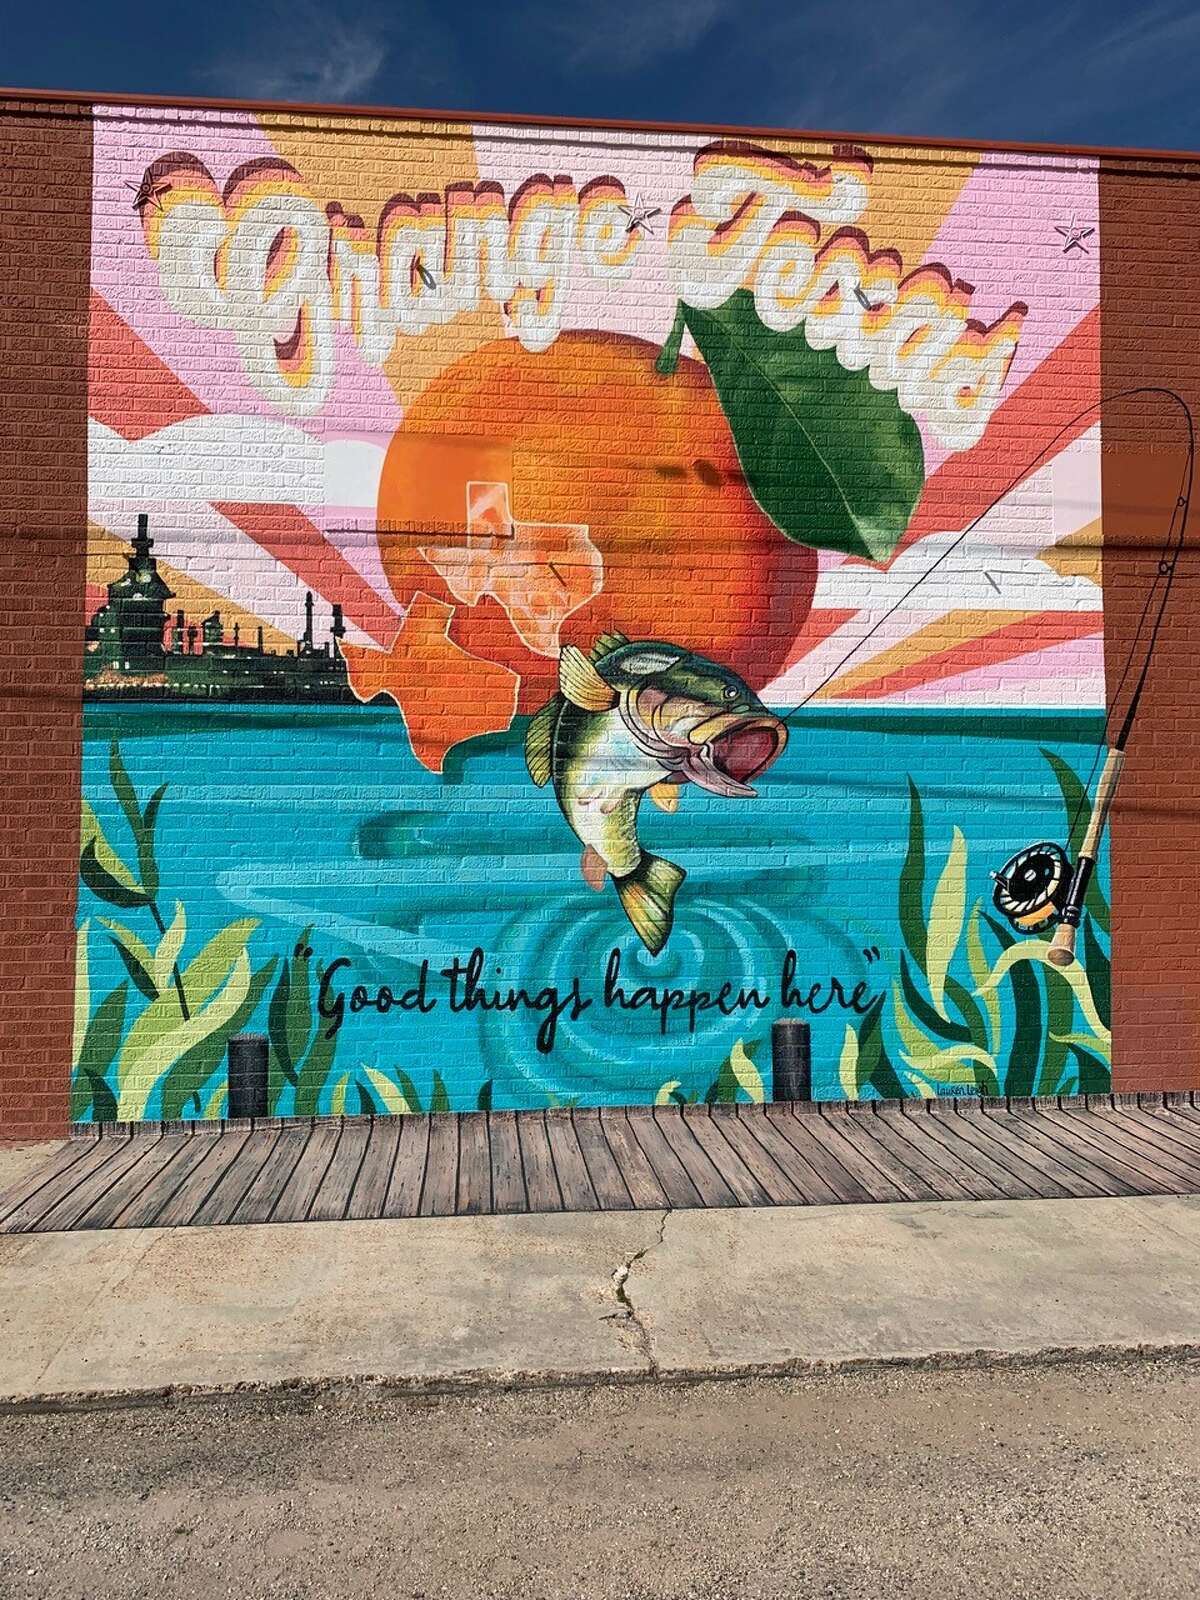 The mural, painted by Lauren Leigh Stanley, is on the side of the Orange Stationer, located at 701 W Division Ave in Orange. Photo taken March 4, 2022. Olivia Malick/The Enterprise